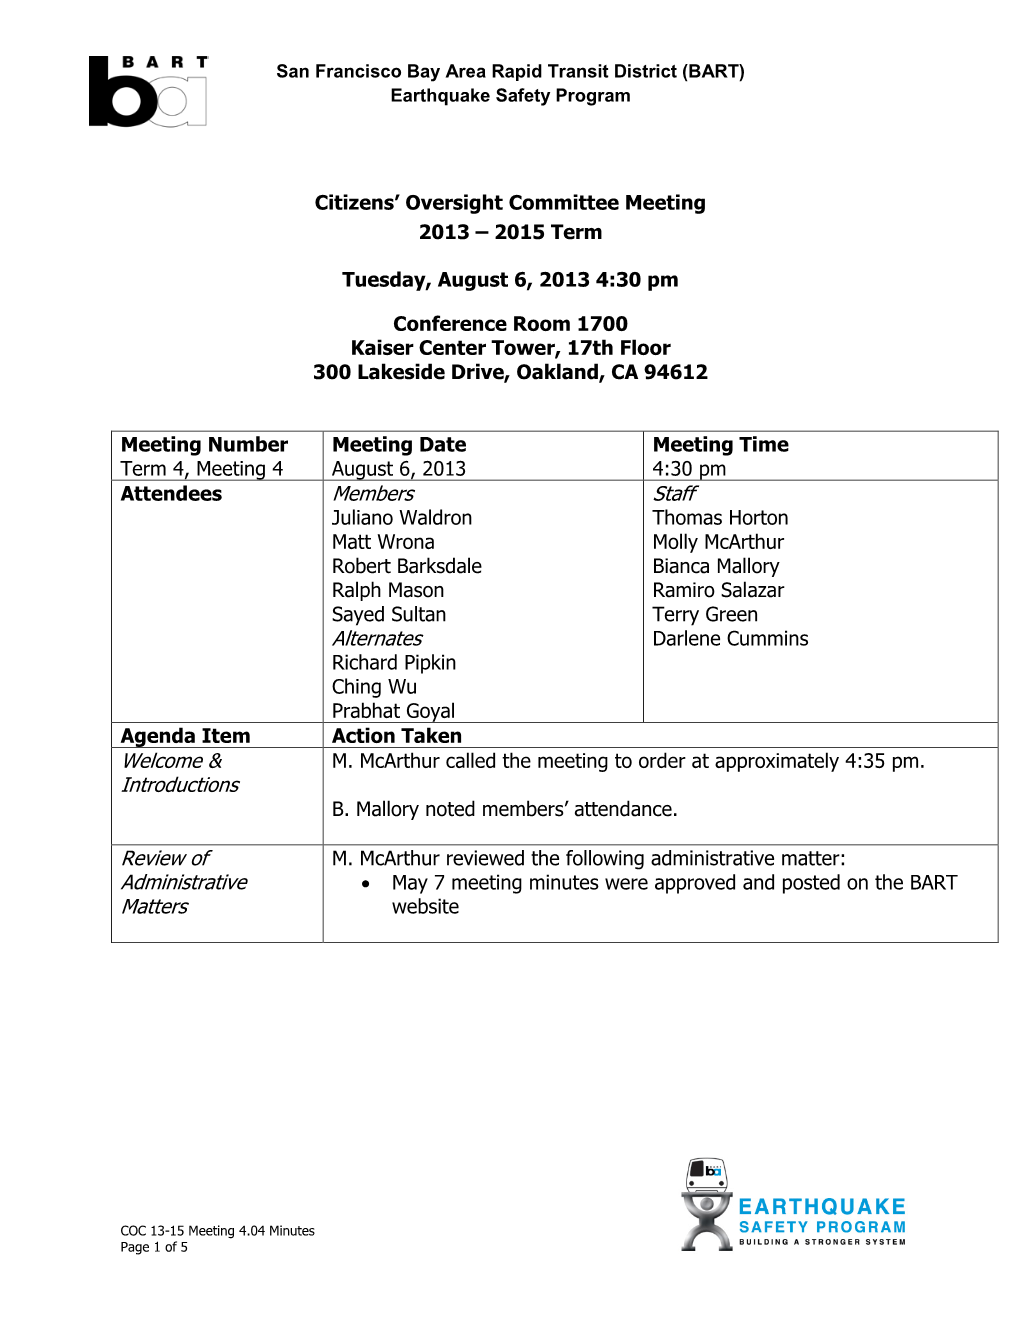 Citizens' Oversight Committee Meeting 2013 – 2015 Term